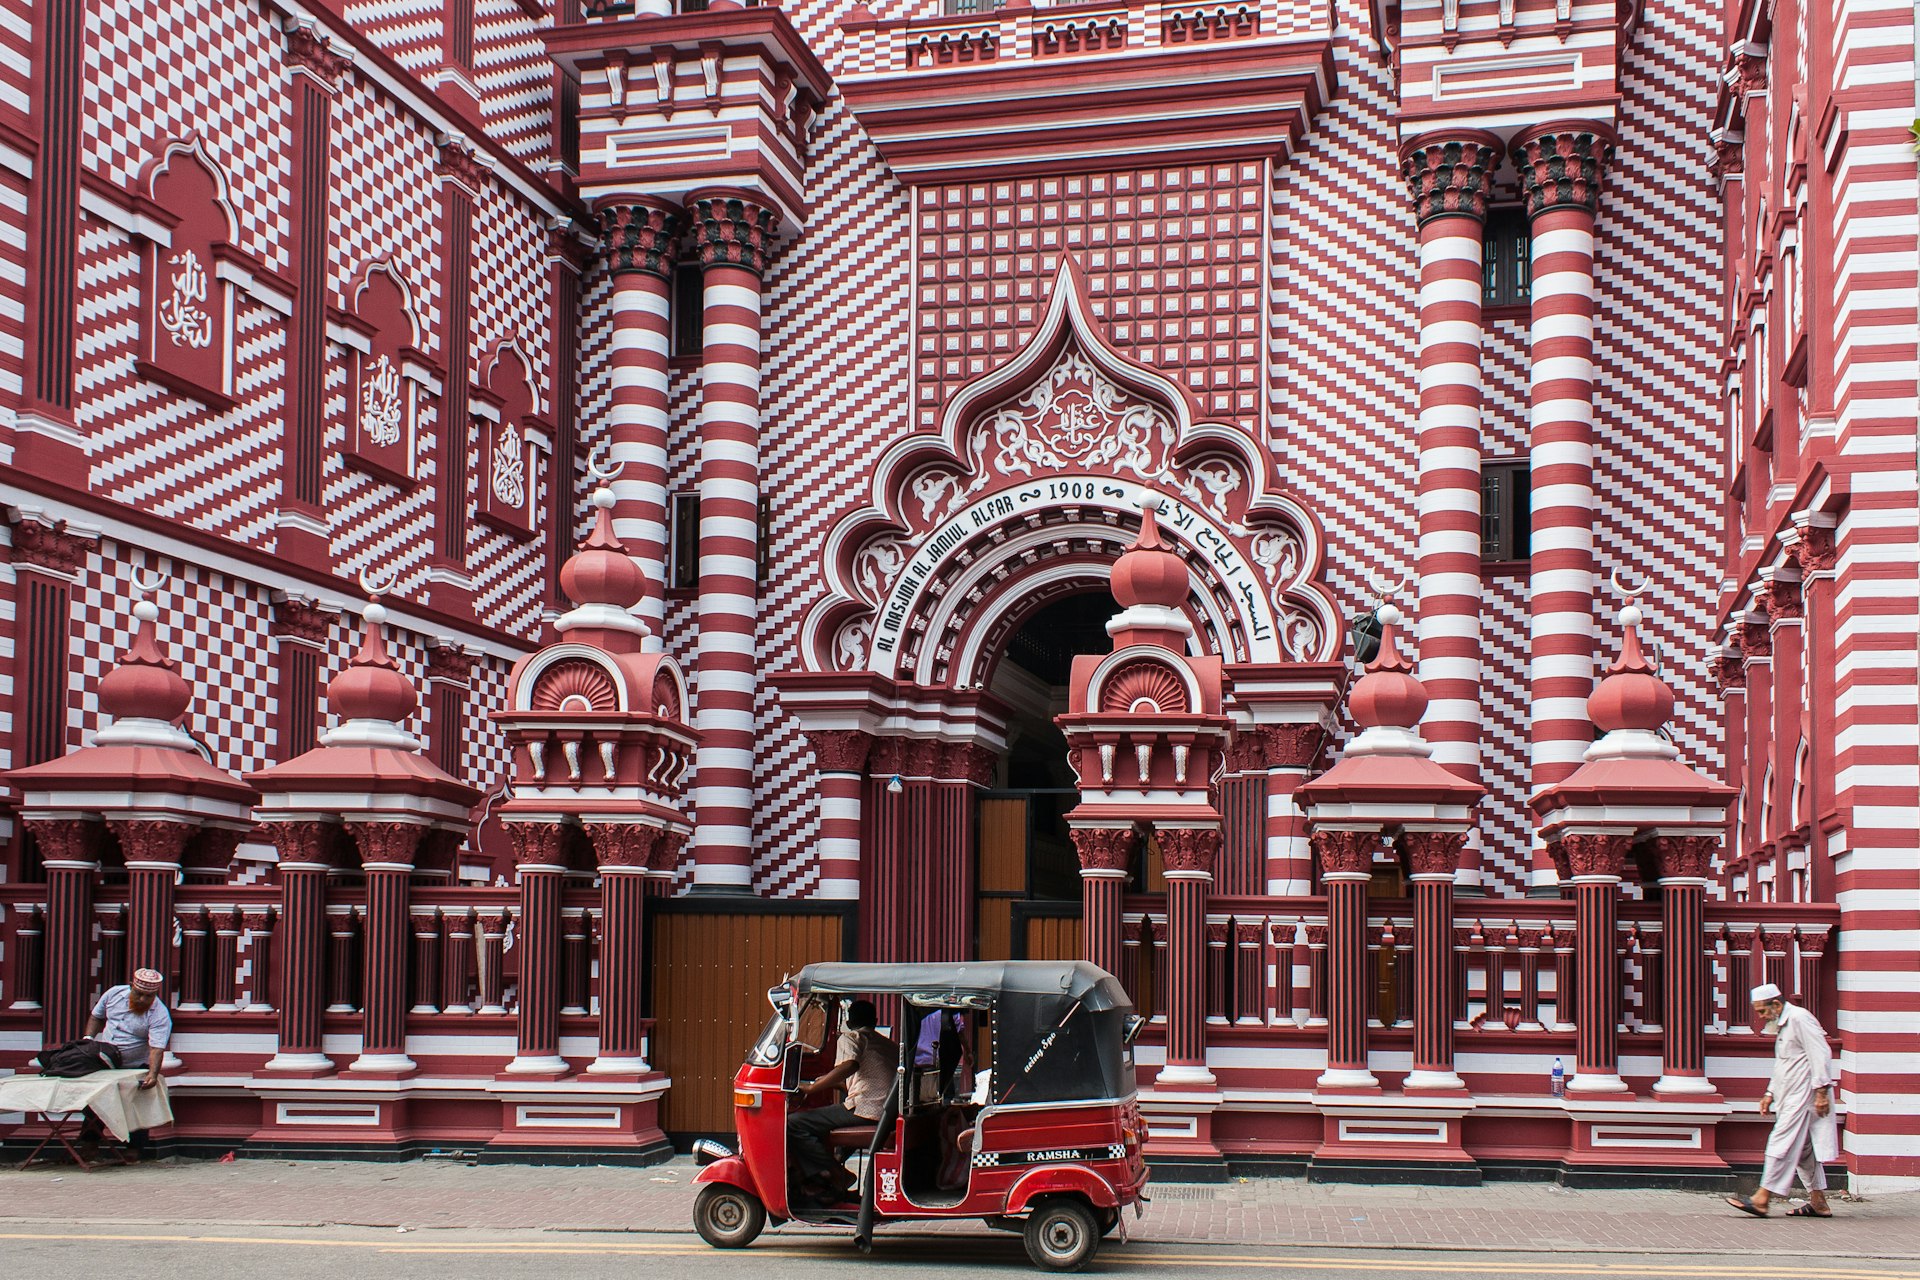 A red auto rickshaw, a pedestrian, and a vendor setting up in front of the decorative red-and-white patterned facade of Jamiul Alfar Mosque, built in 1908, in the heart of the bazaar of Pettah, one of the oldest districts in Colombo